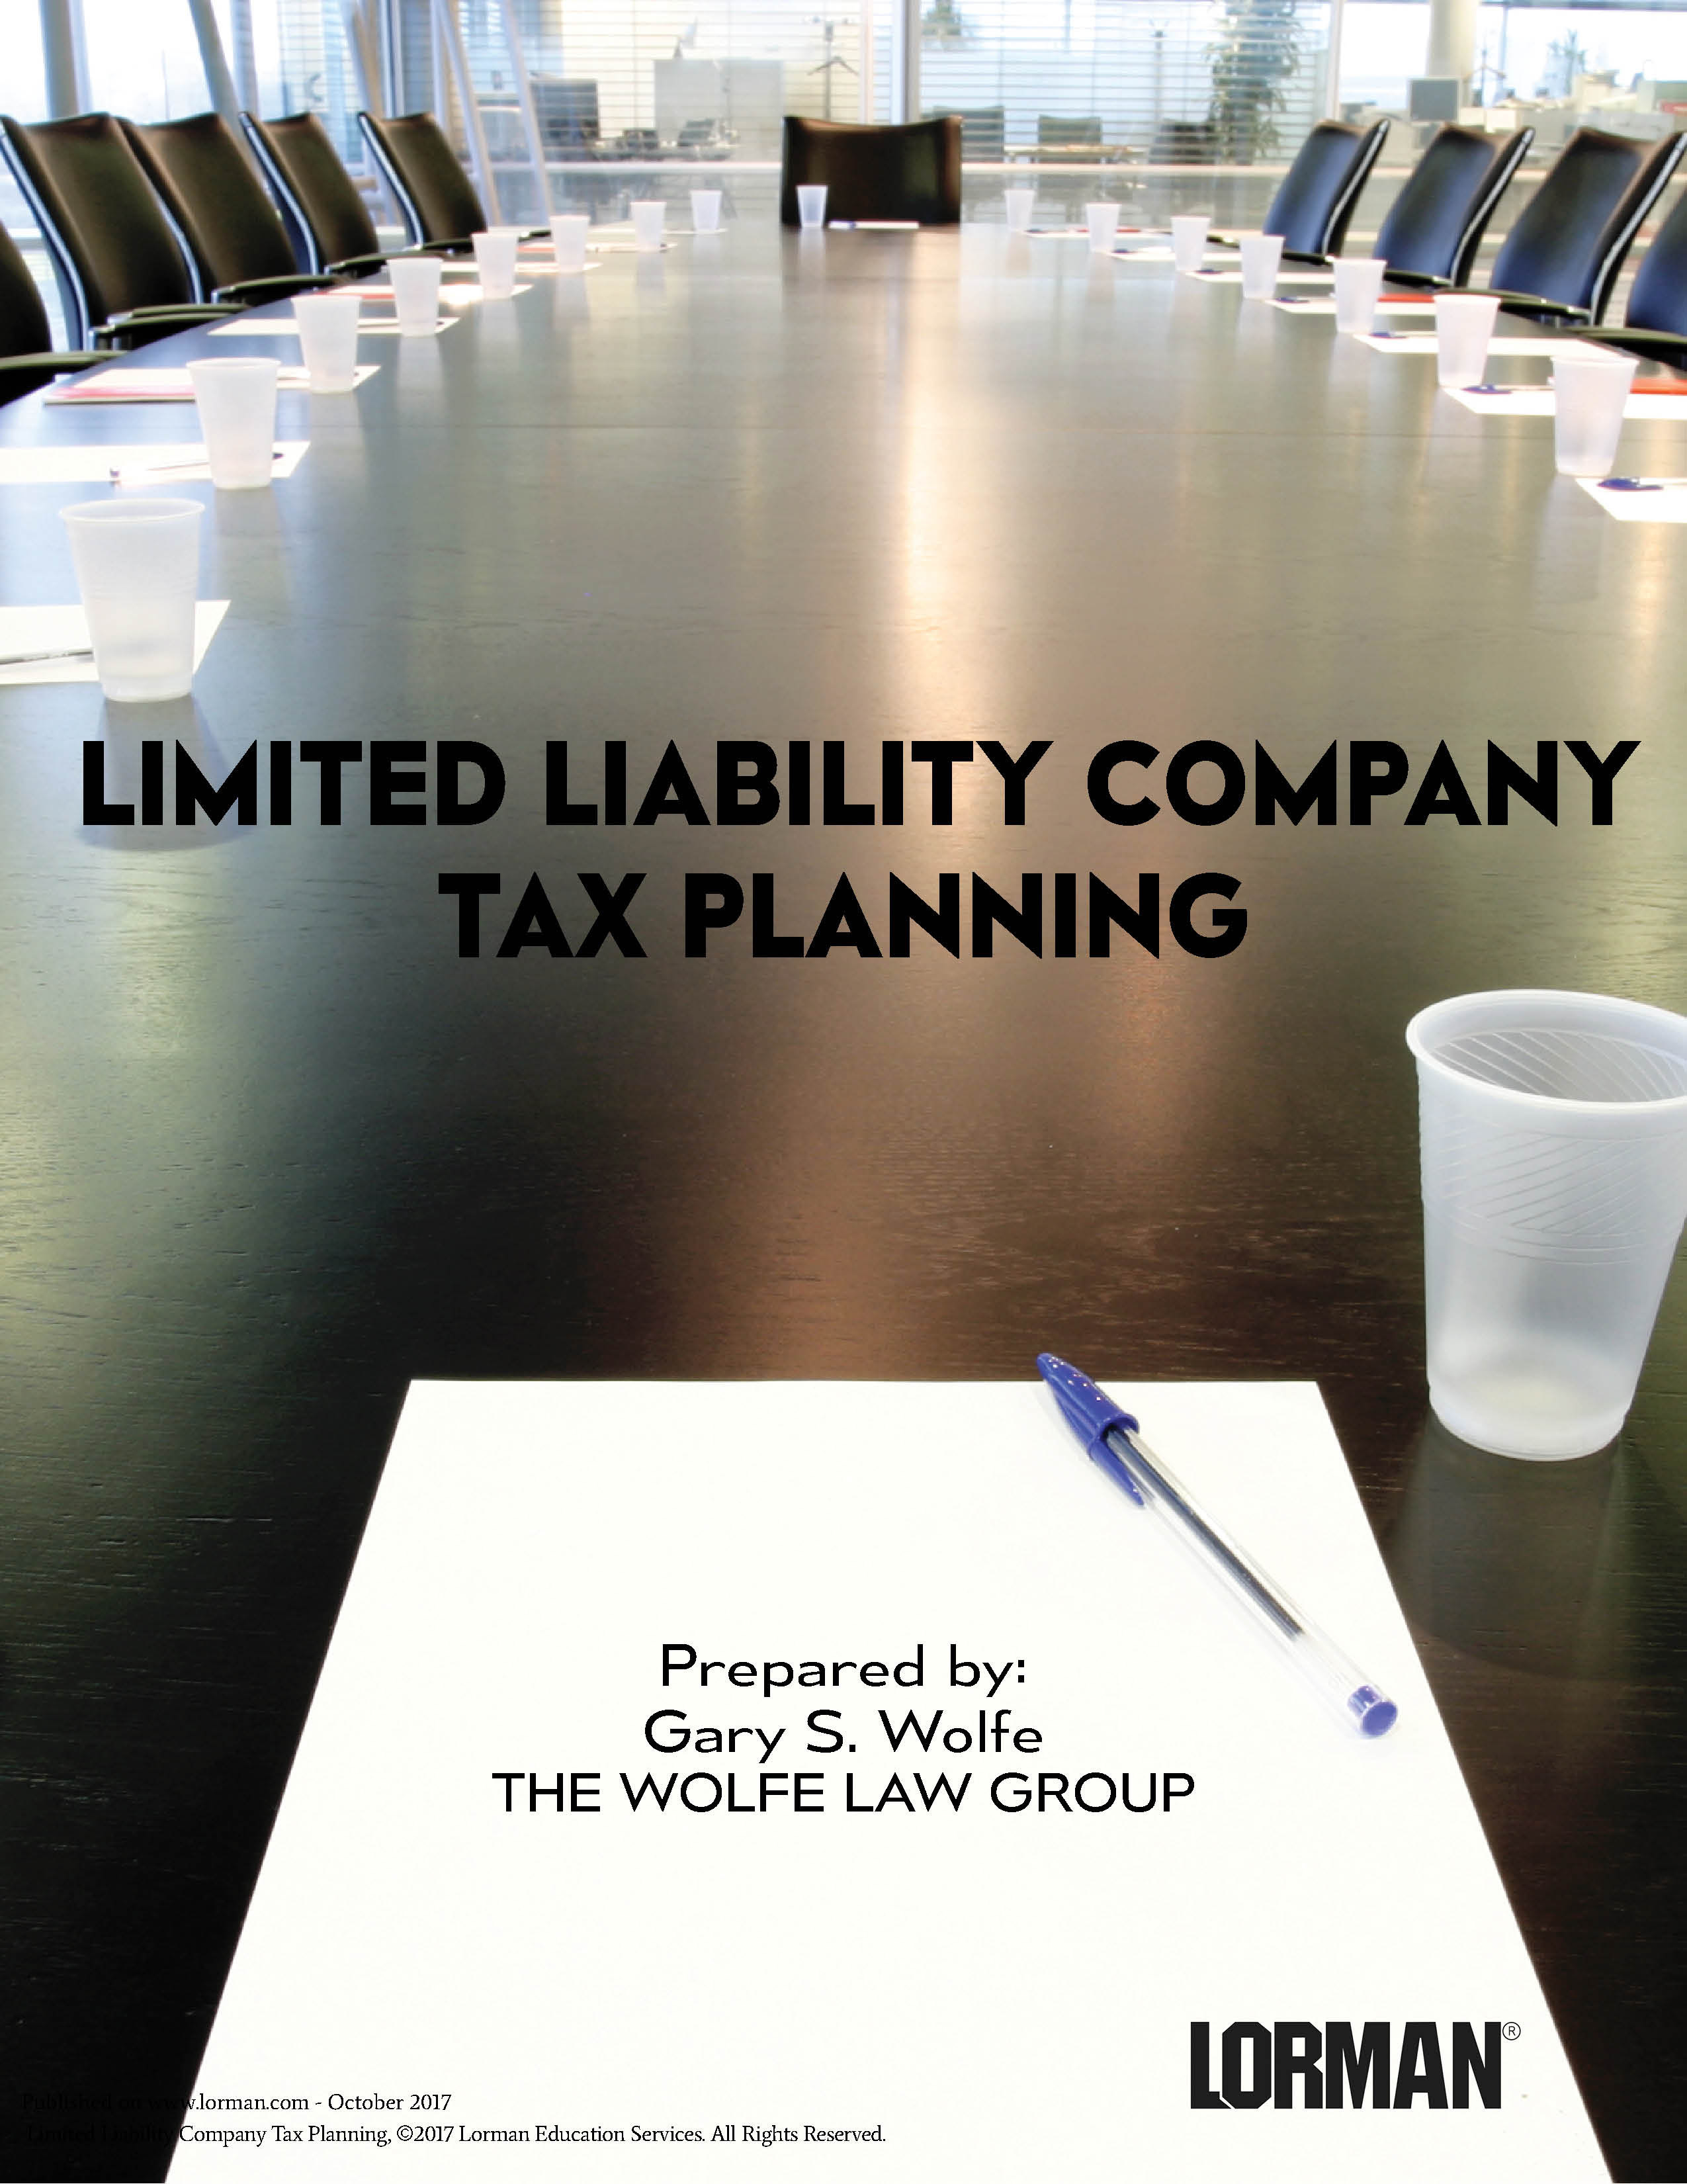 Limited Liability Company Tax Planning